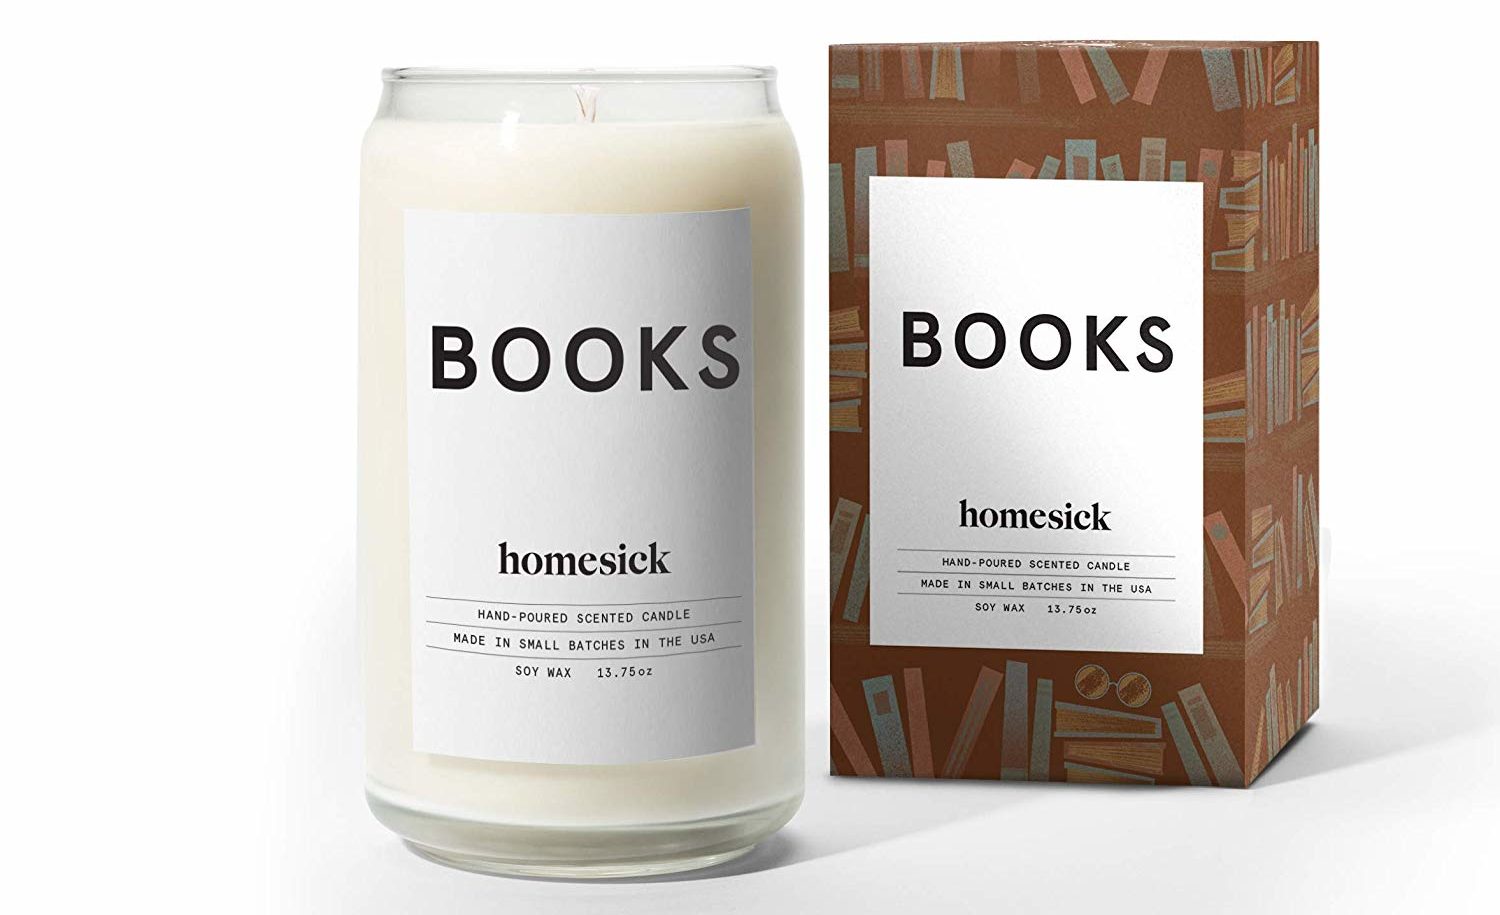 Best Teacher Gifts 2022: The Books Candle 2022